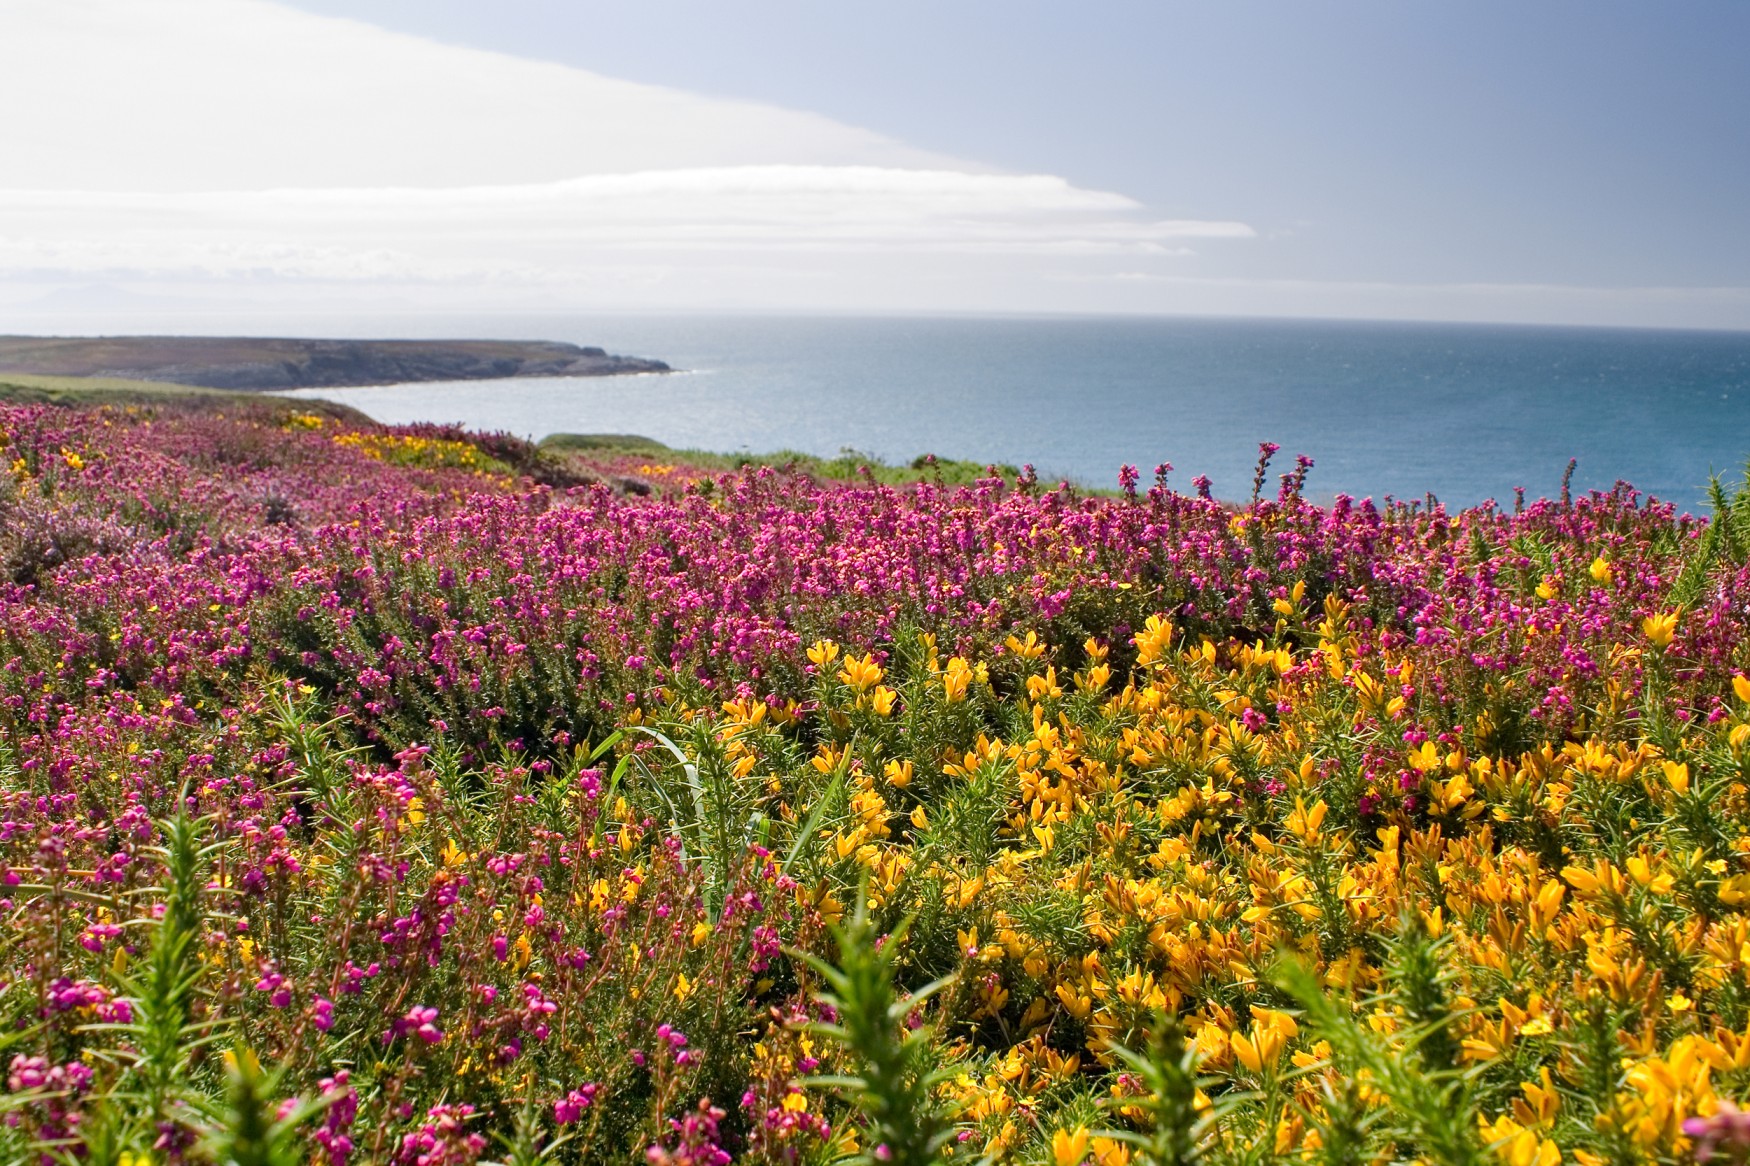 Heathland with gorse on the coast of Wales